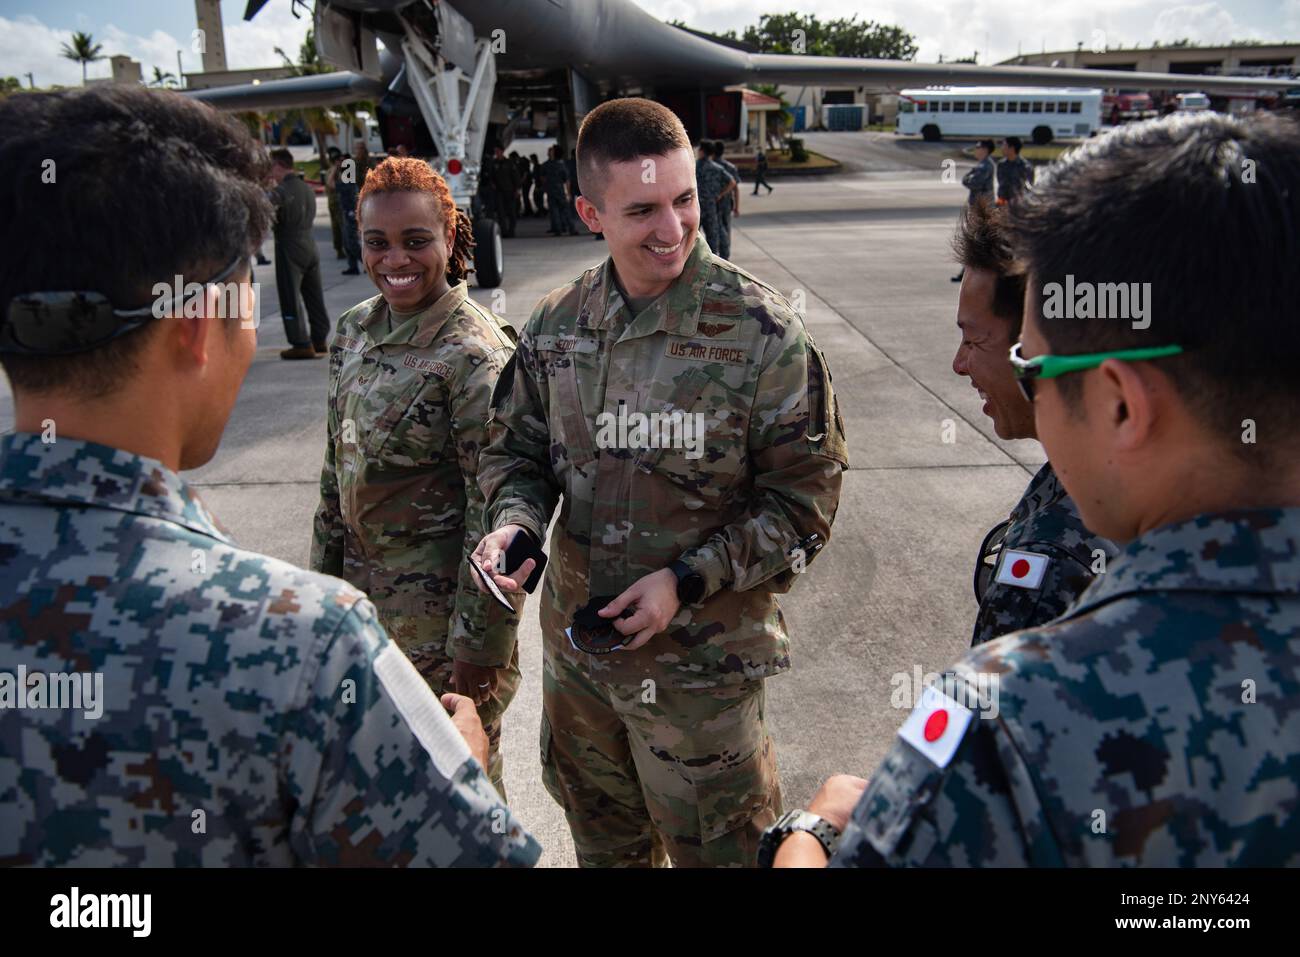 U.S. Air Force Airmen and Japan Air Self-Defense Force members trade patches during a static display in support of the Cope North 2023 exercise at Andersen Air Force Base, Guam, Feb. 8, 2023. CN23 objectives aim to further integrate the contributions of allies and partners to enhance security and stability to maintain a free and open Indo-Pacific region. Stock Photo